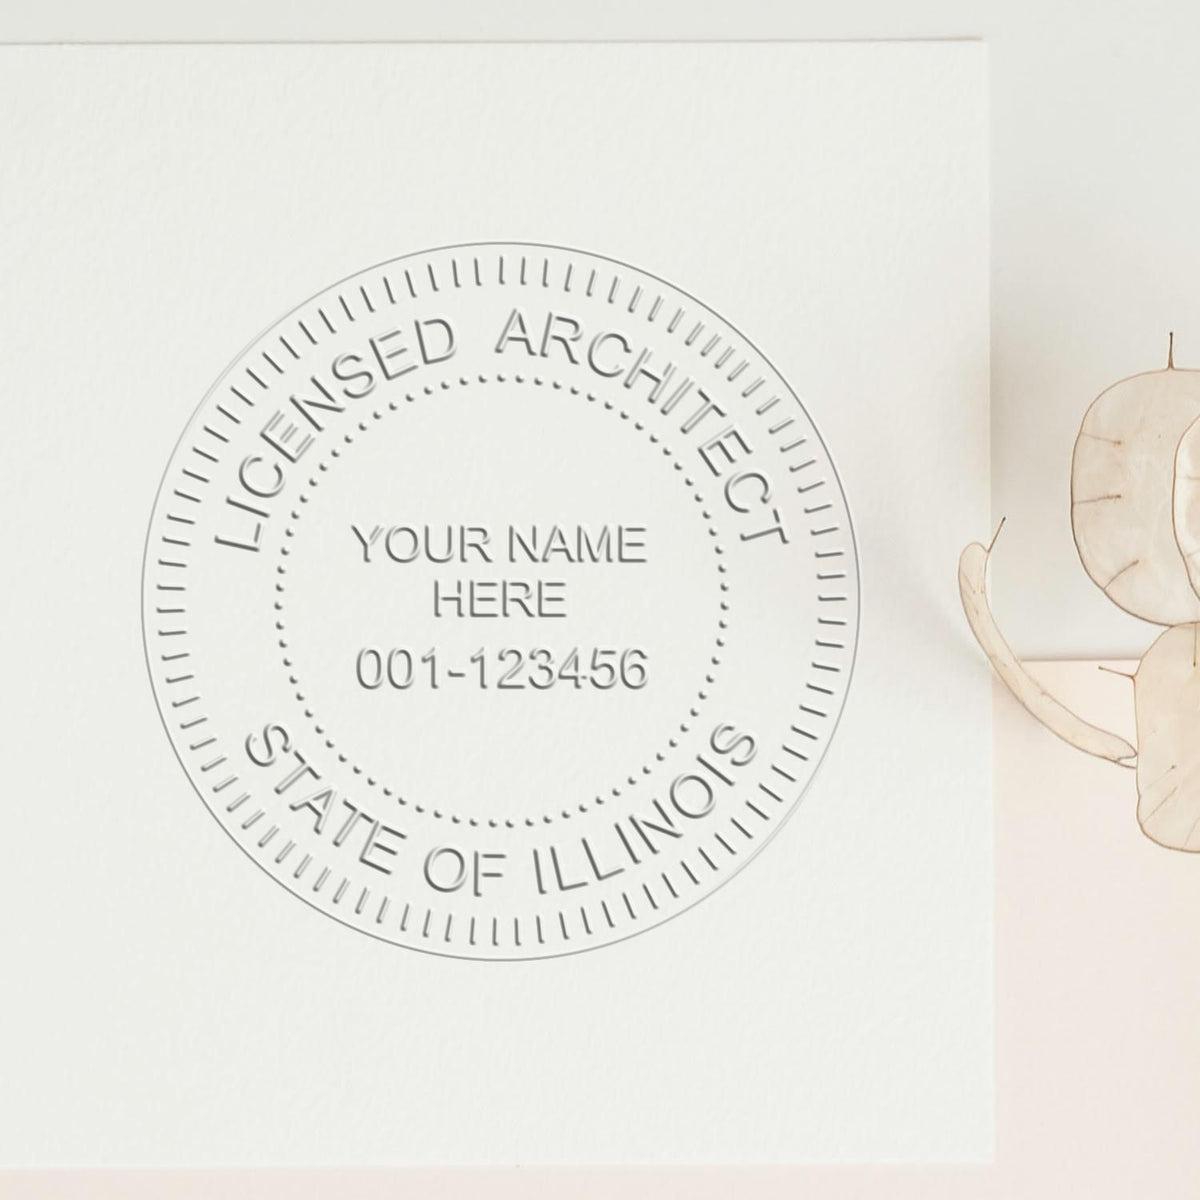 The Gift Illinois Architect Seal stamp impression comes to life with a crisp, detailed image stamped on paper - showcasing true professional quality.